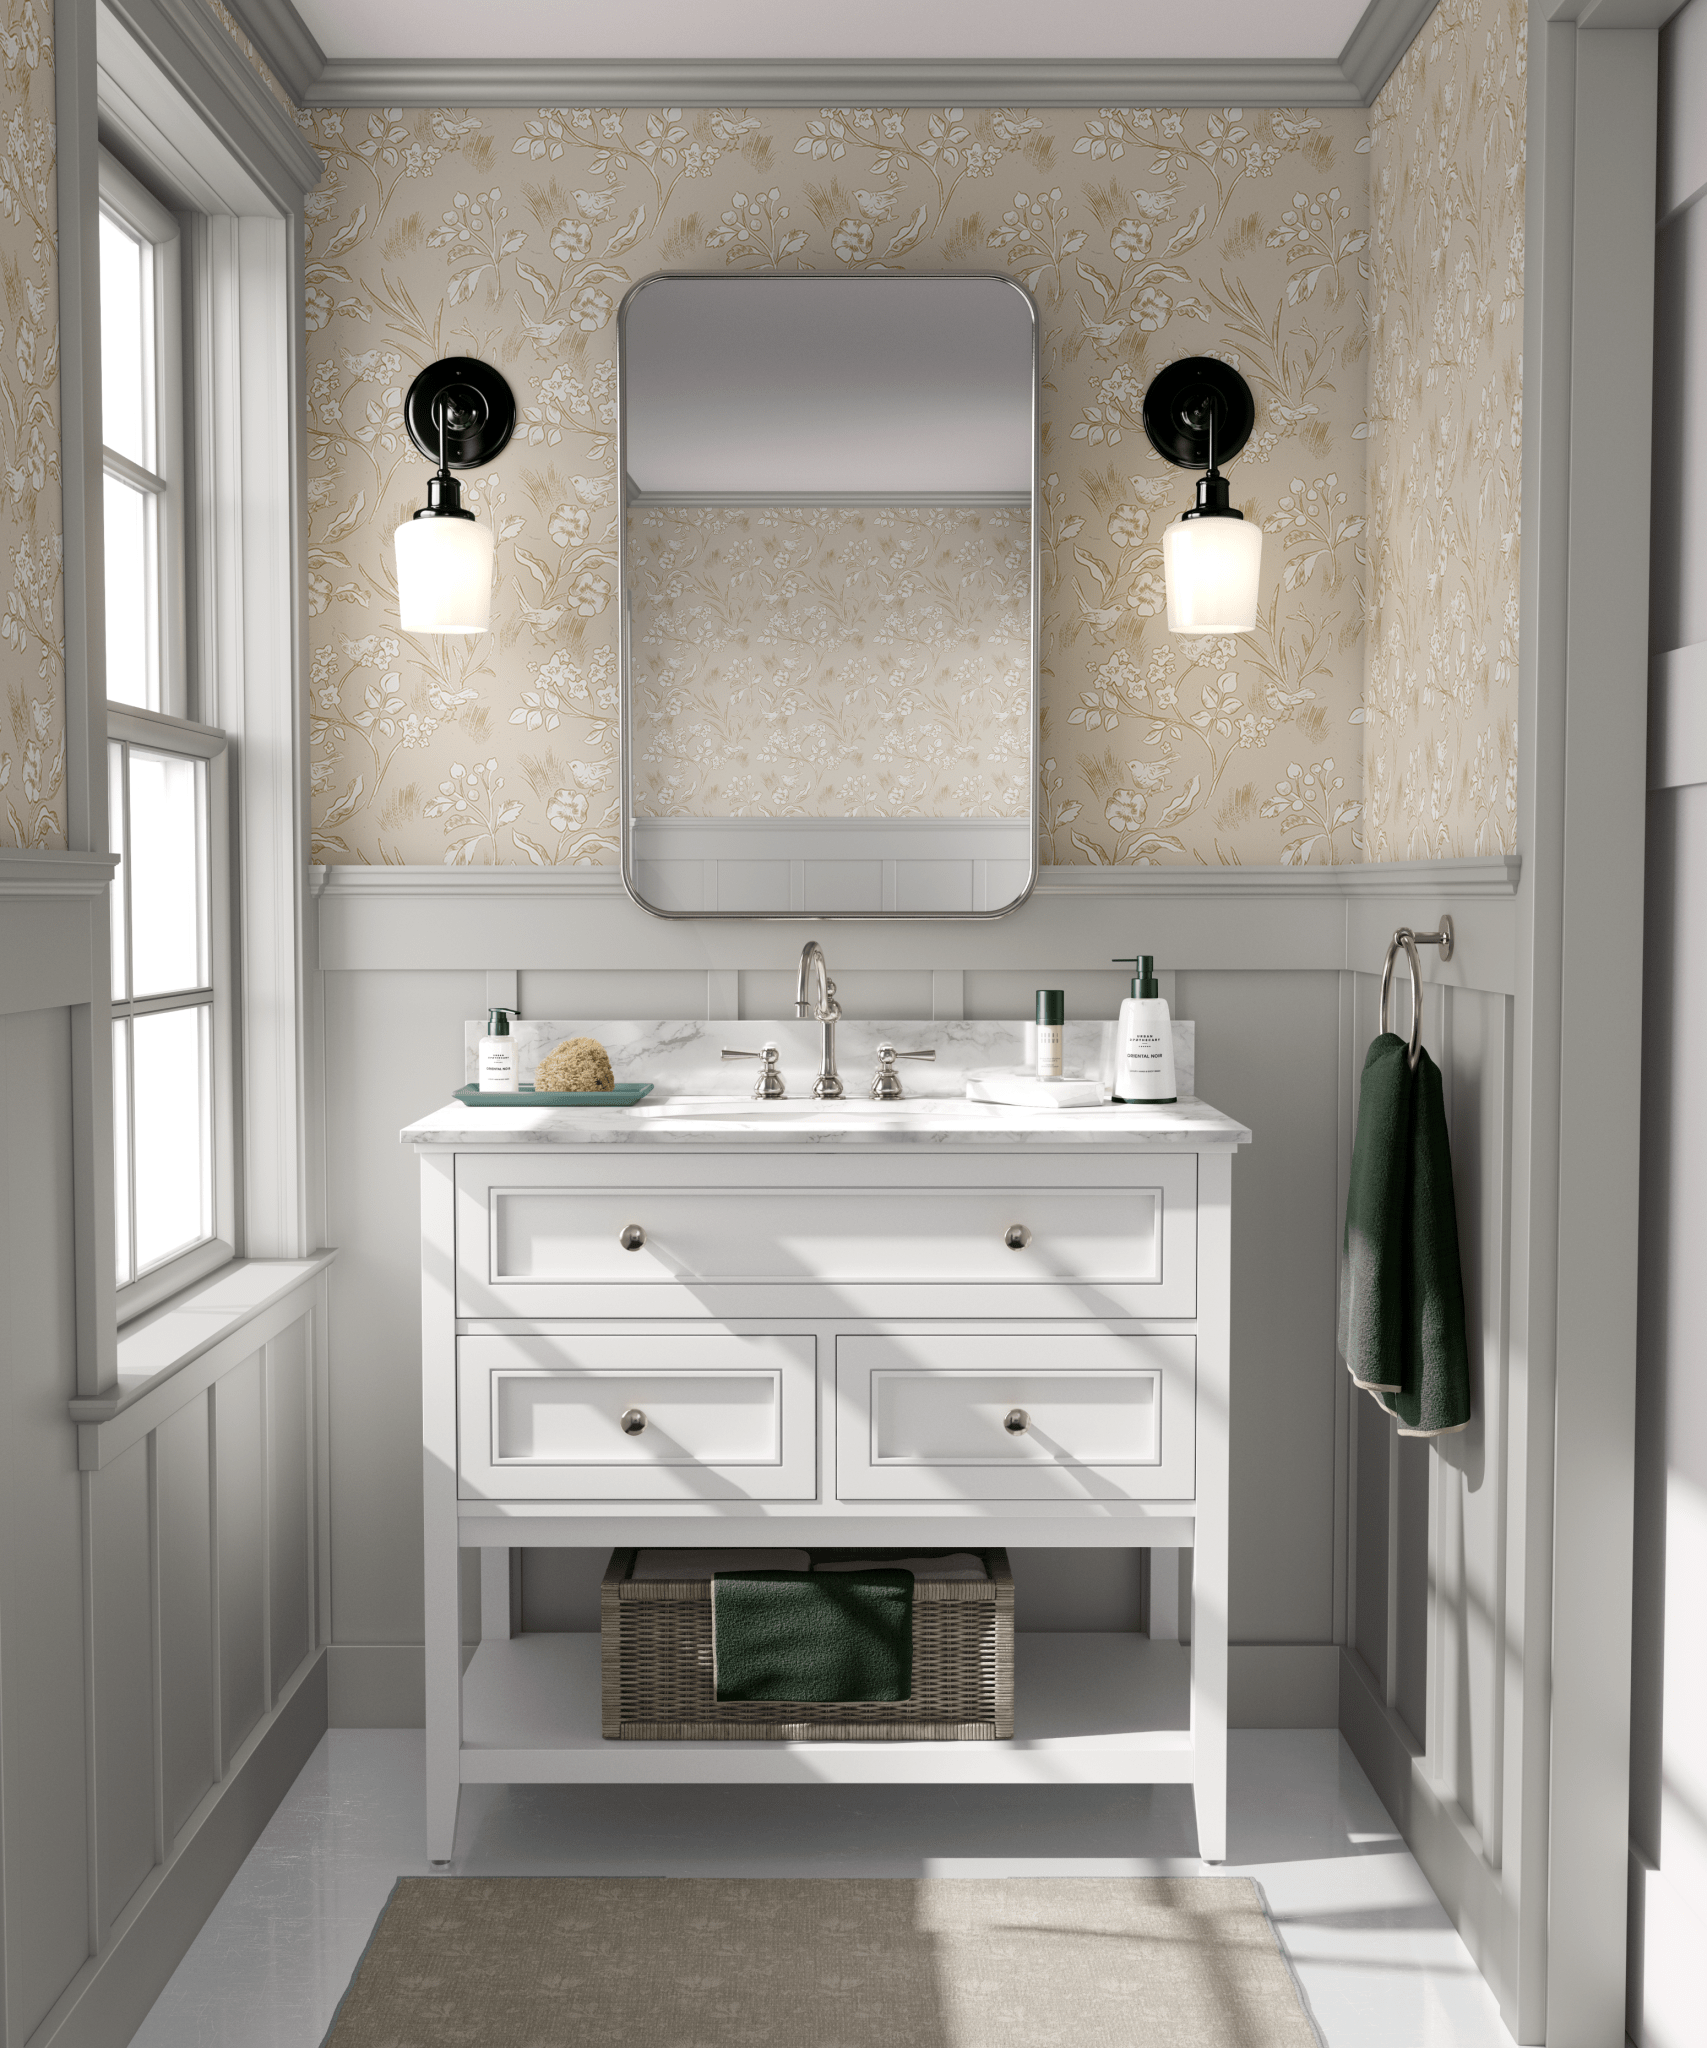 A clean and elegant bathroom with neutral birds and blossoms wallpaper, white vanity, and grey accents